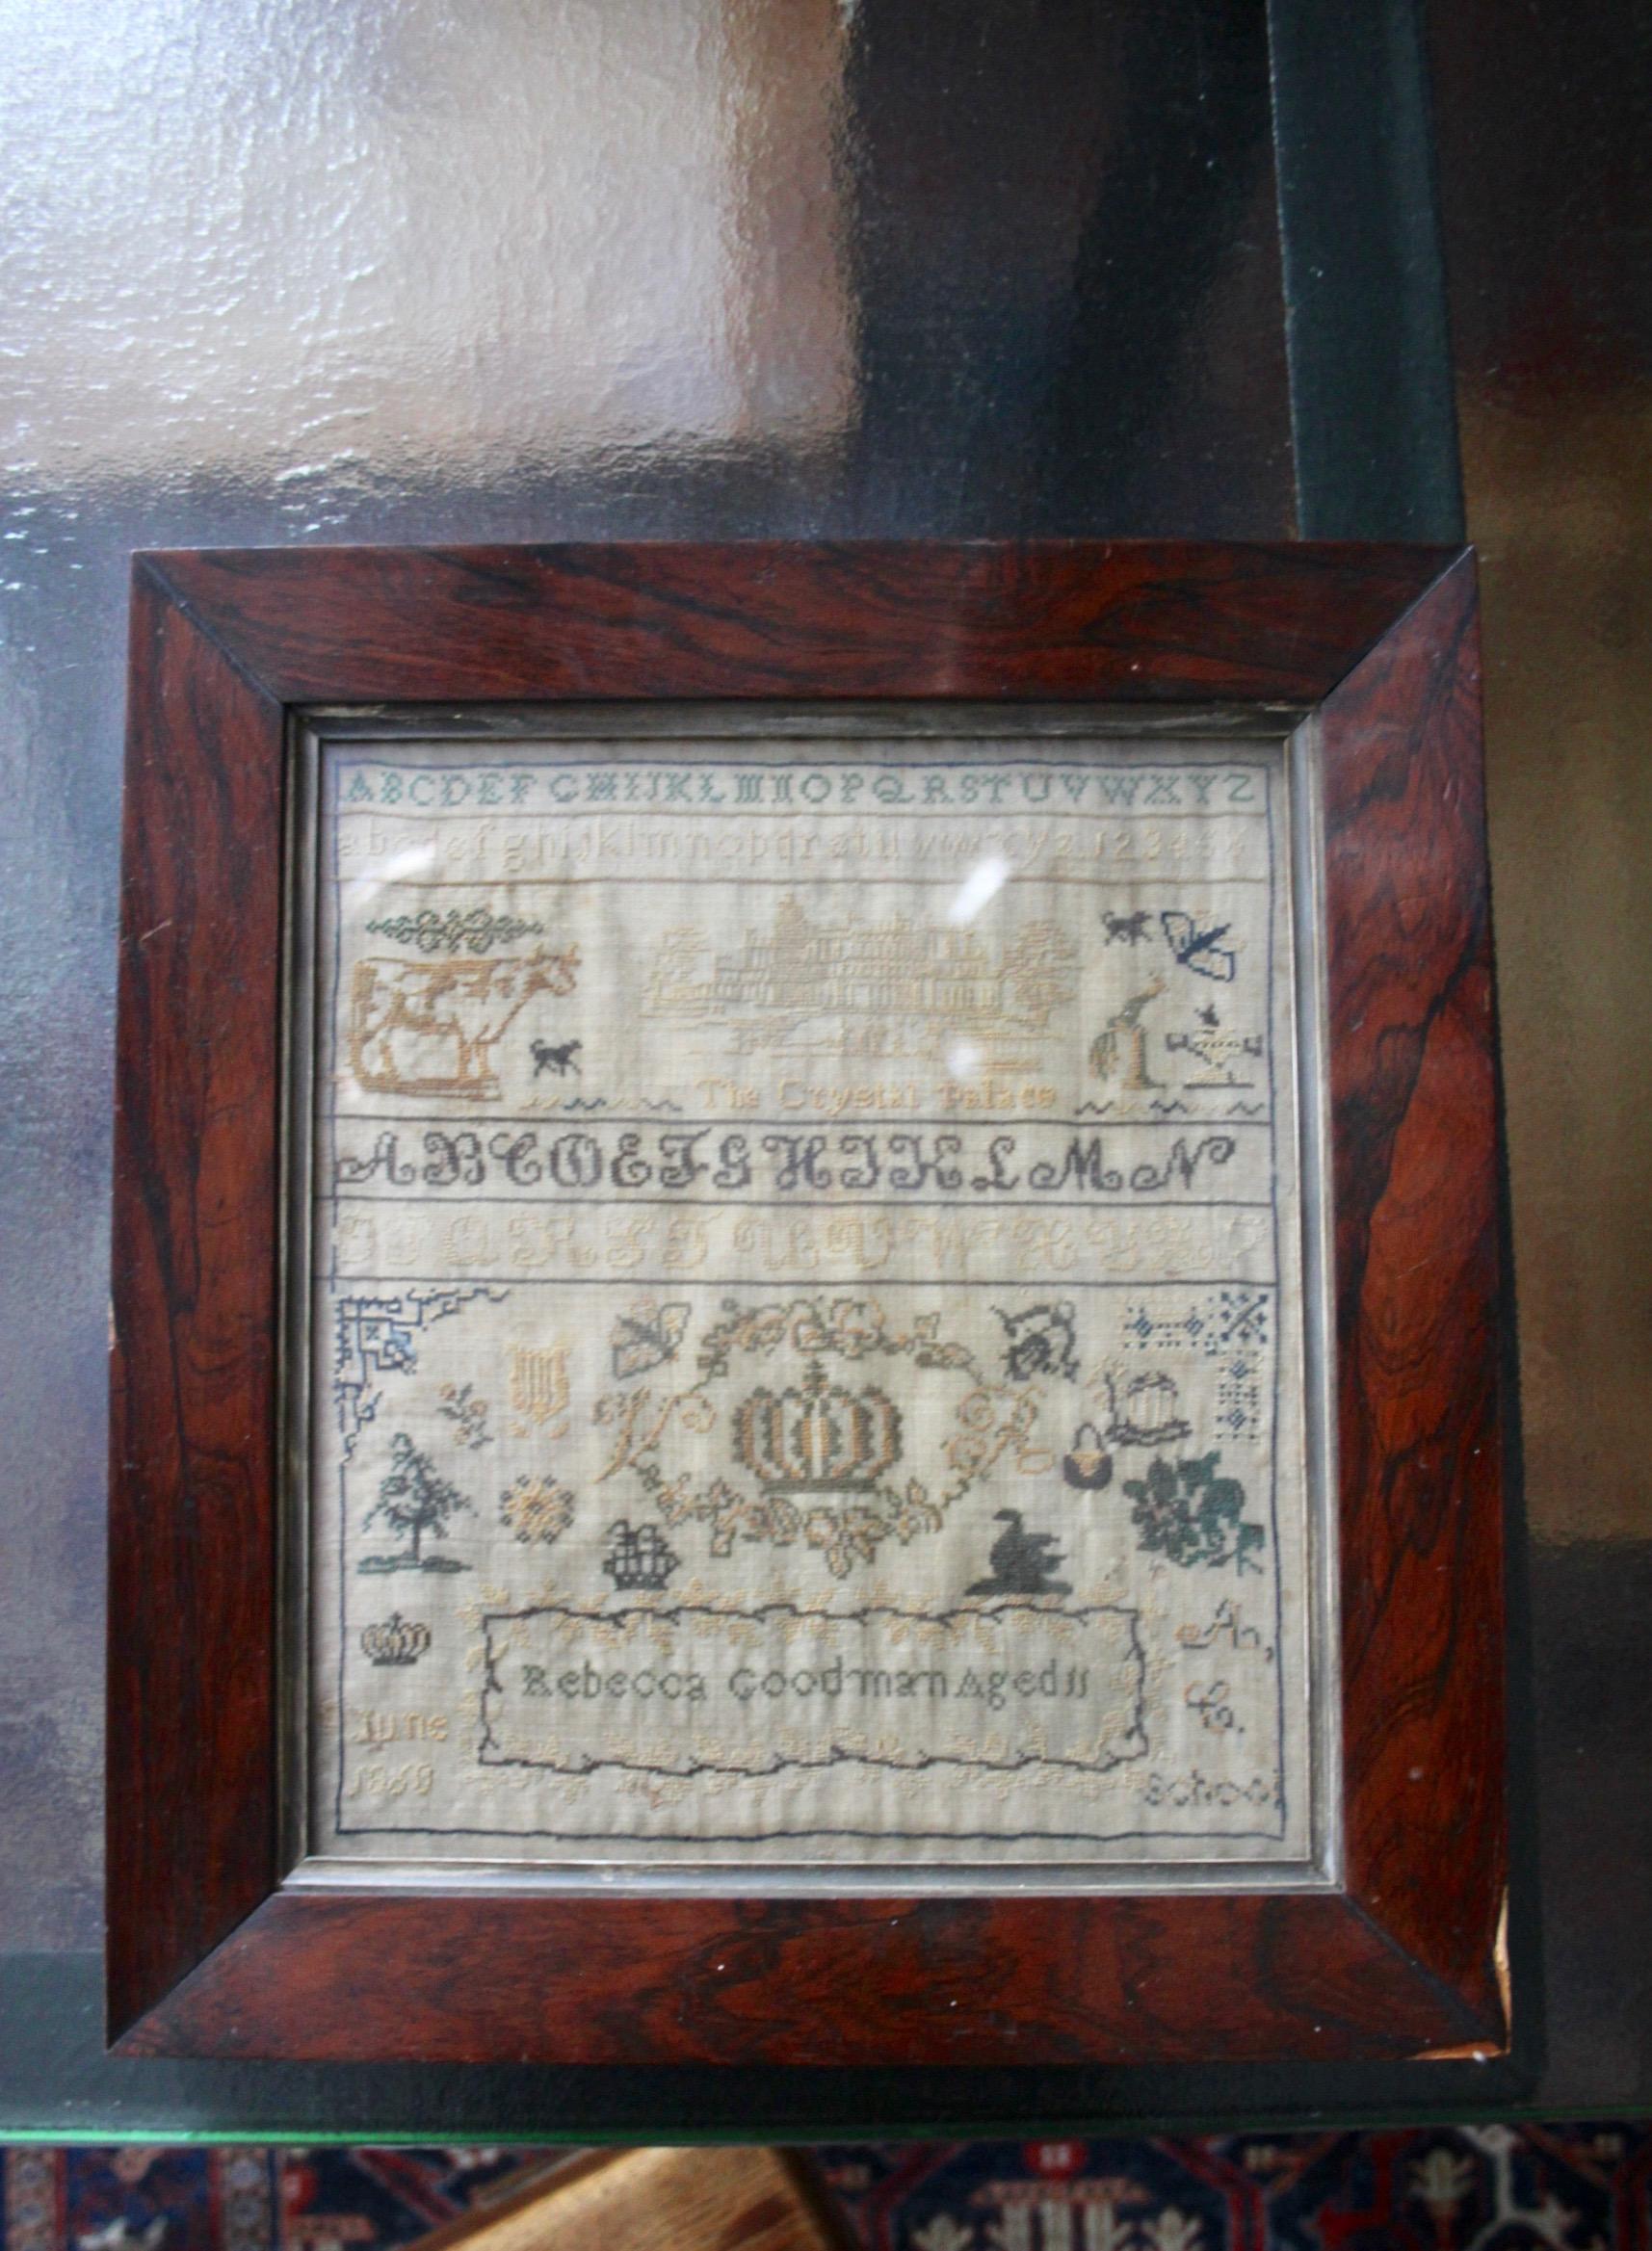 English embroidered needlework tapestry sampler picture signed by Rebecca Goodman and dates June 1860